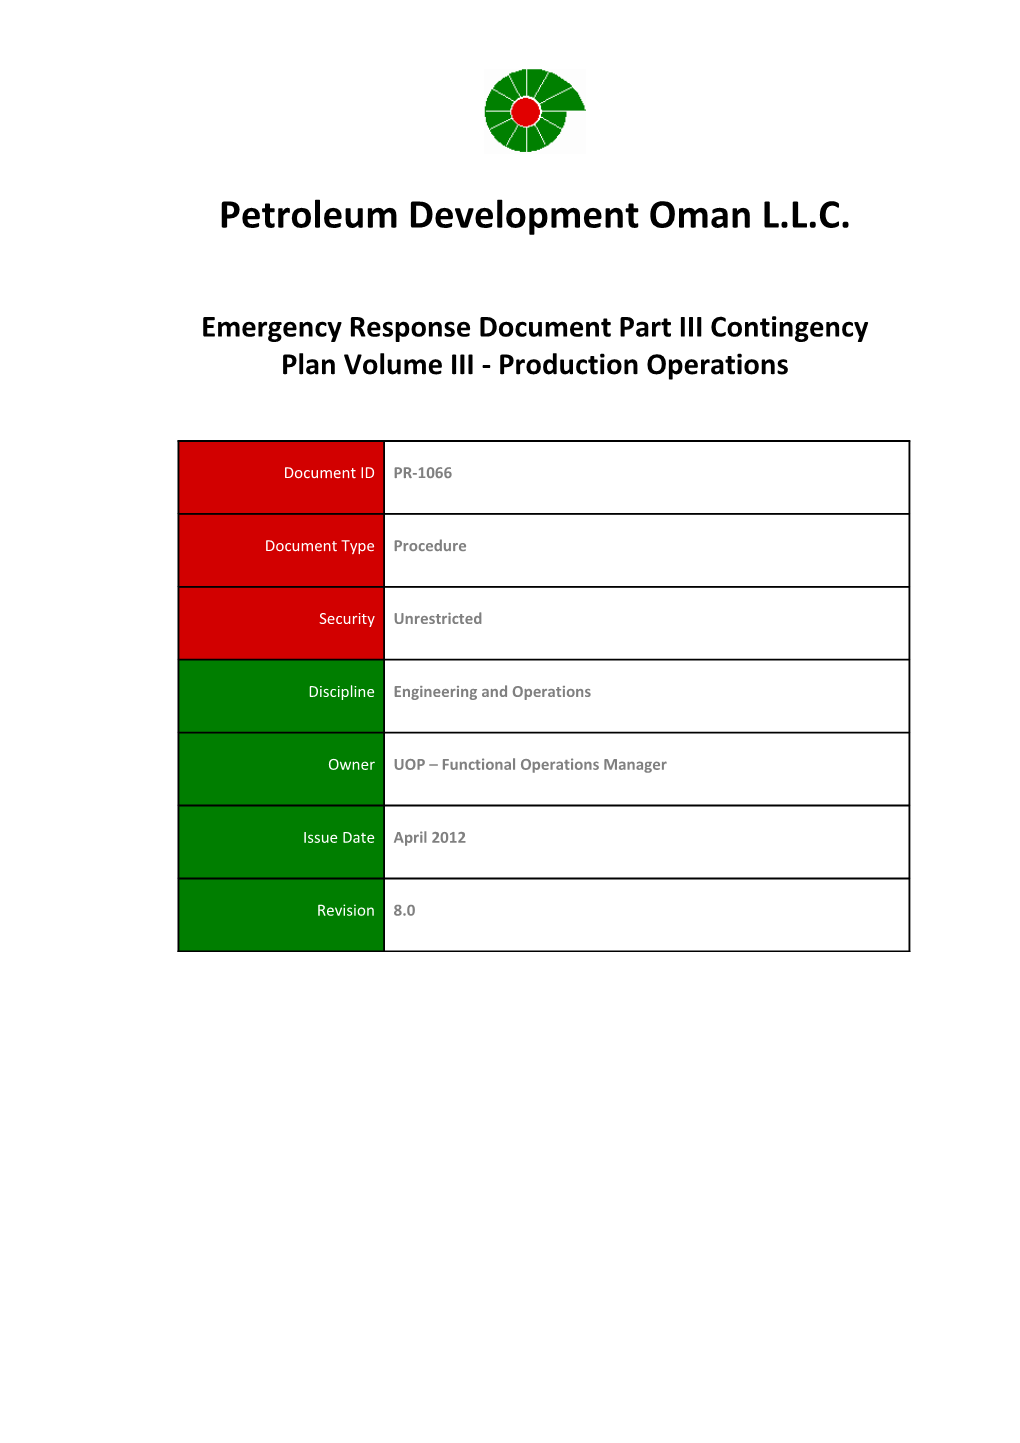 Emergency Response Document Part III Contingency Plan, Volume III Production Operations